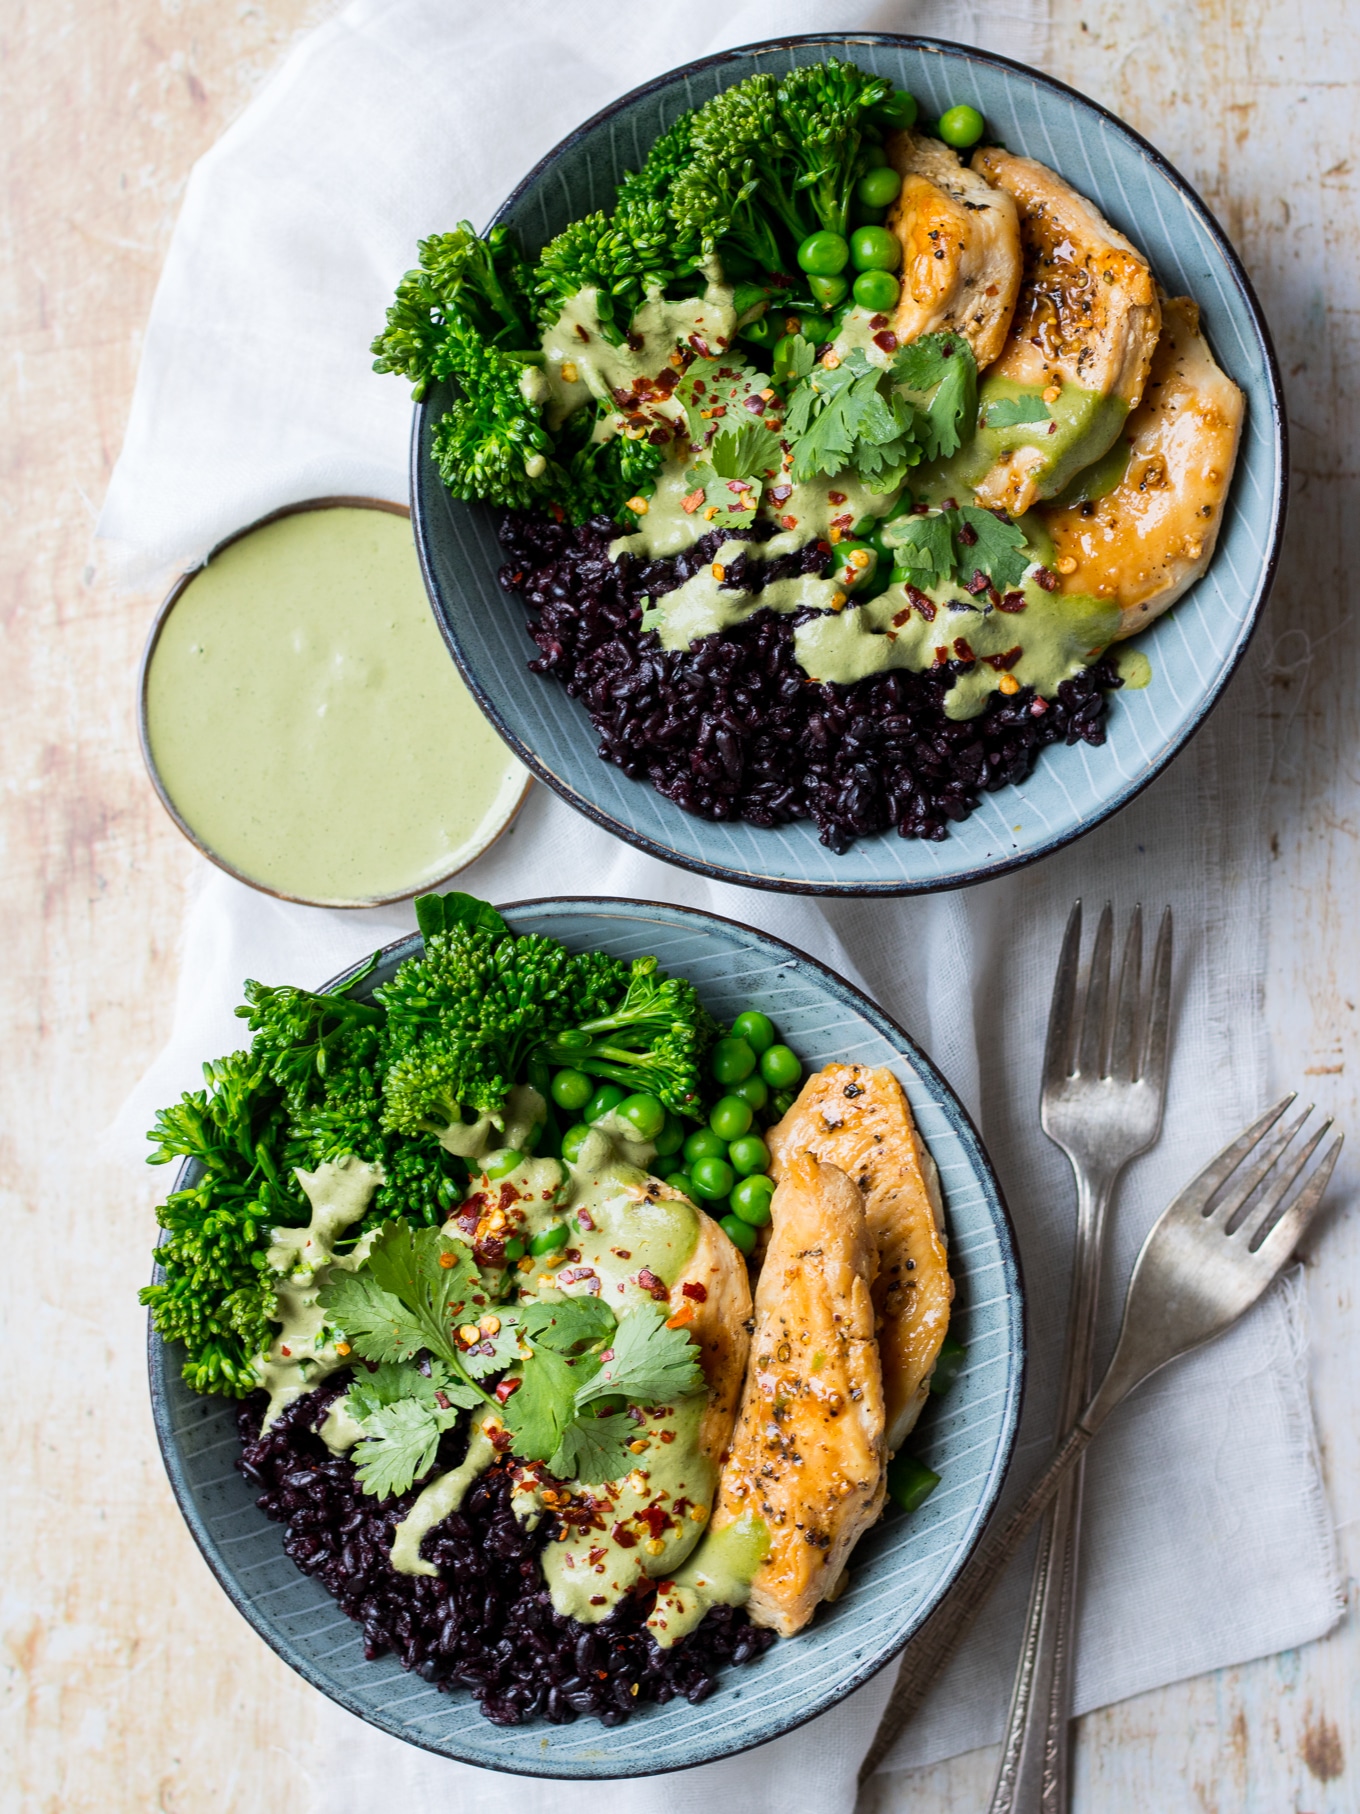 Chicken black rice bowls; two blue bowls filled with black rice, chicken and broccolini, side of green herb sauce, on a light table